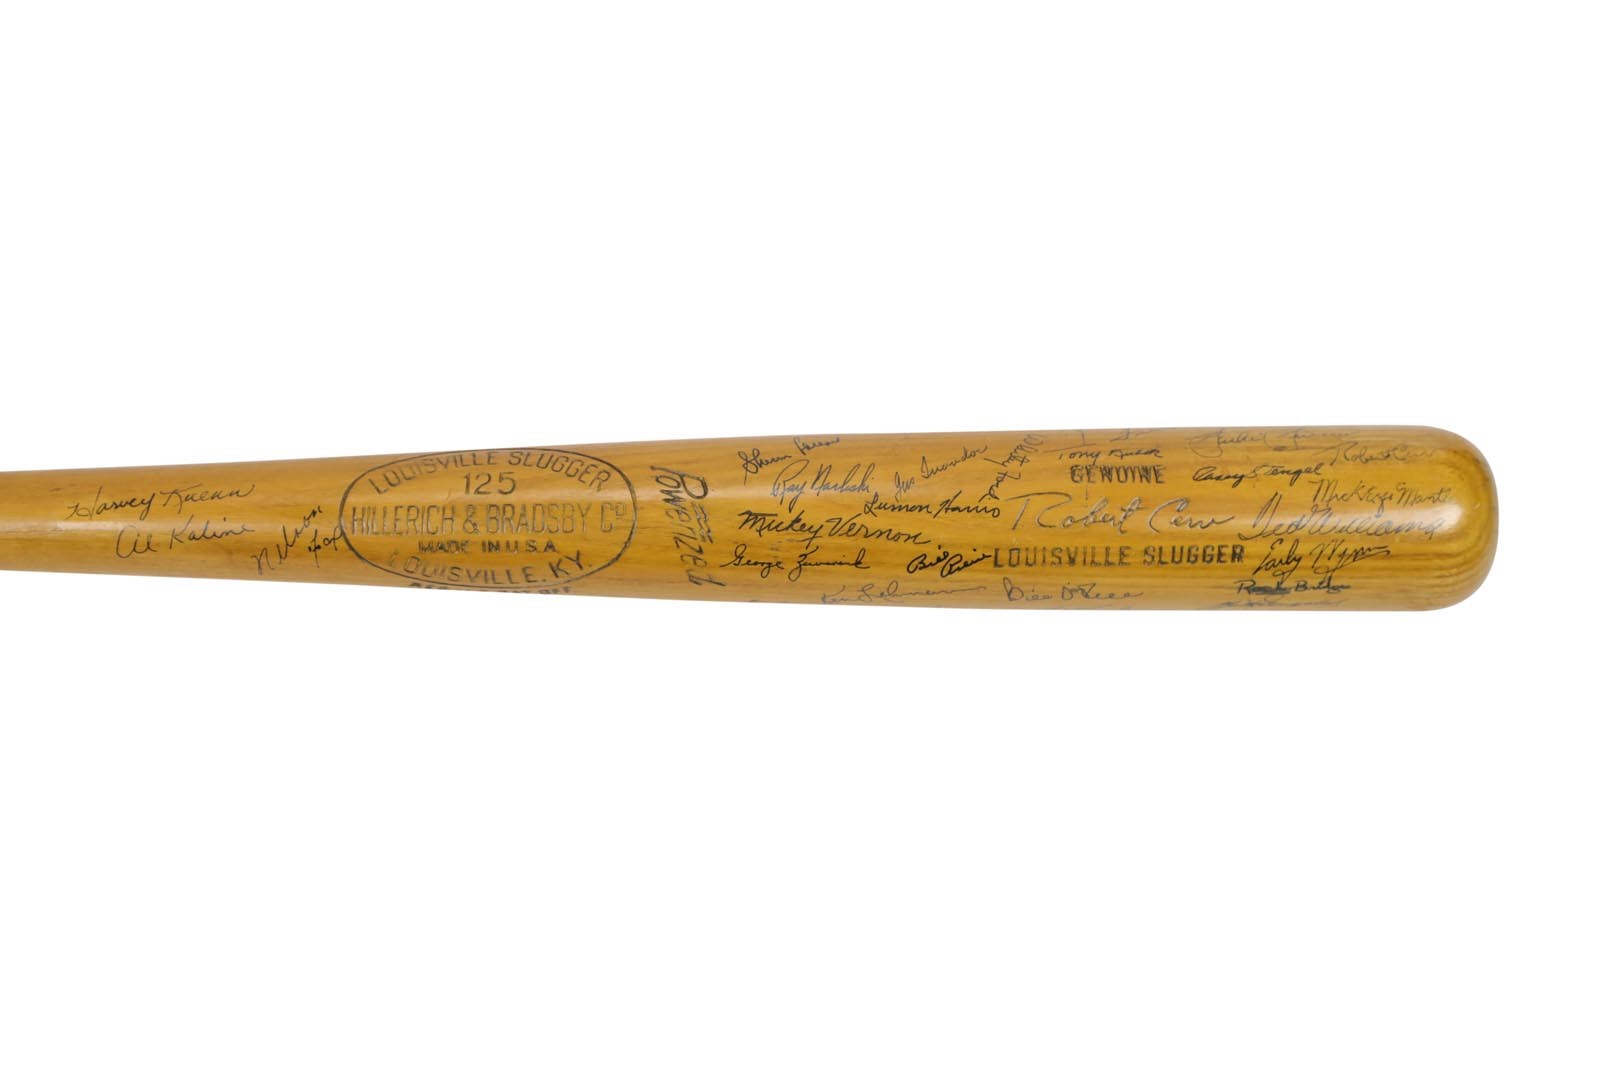 1958 American League All Star Signed Bat from Mickey Mantles Roomate Bob Cerv (PSA)